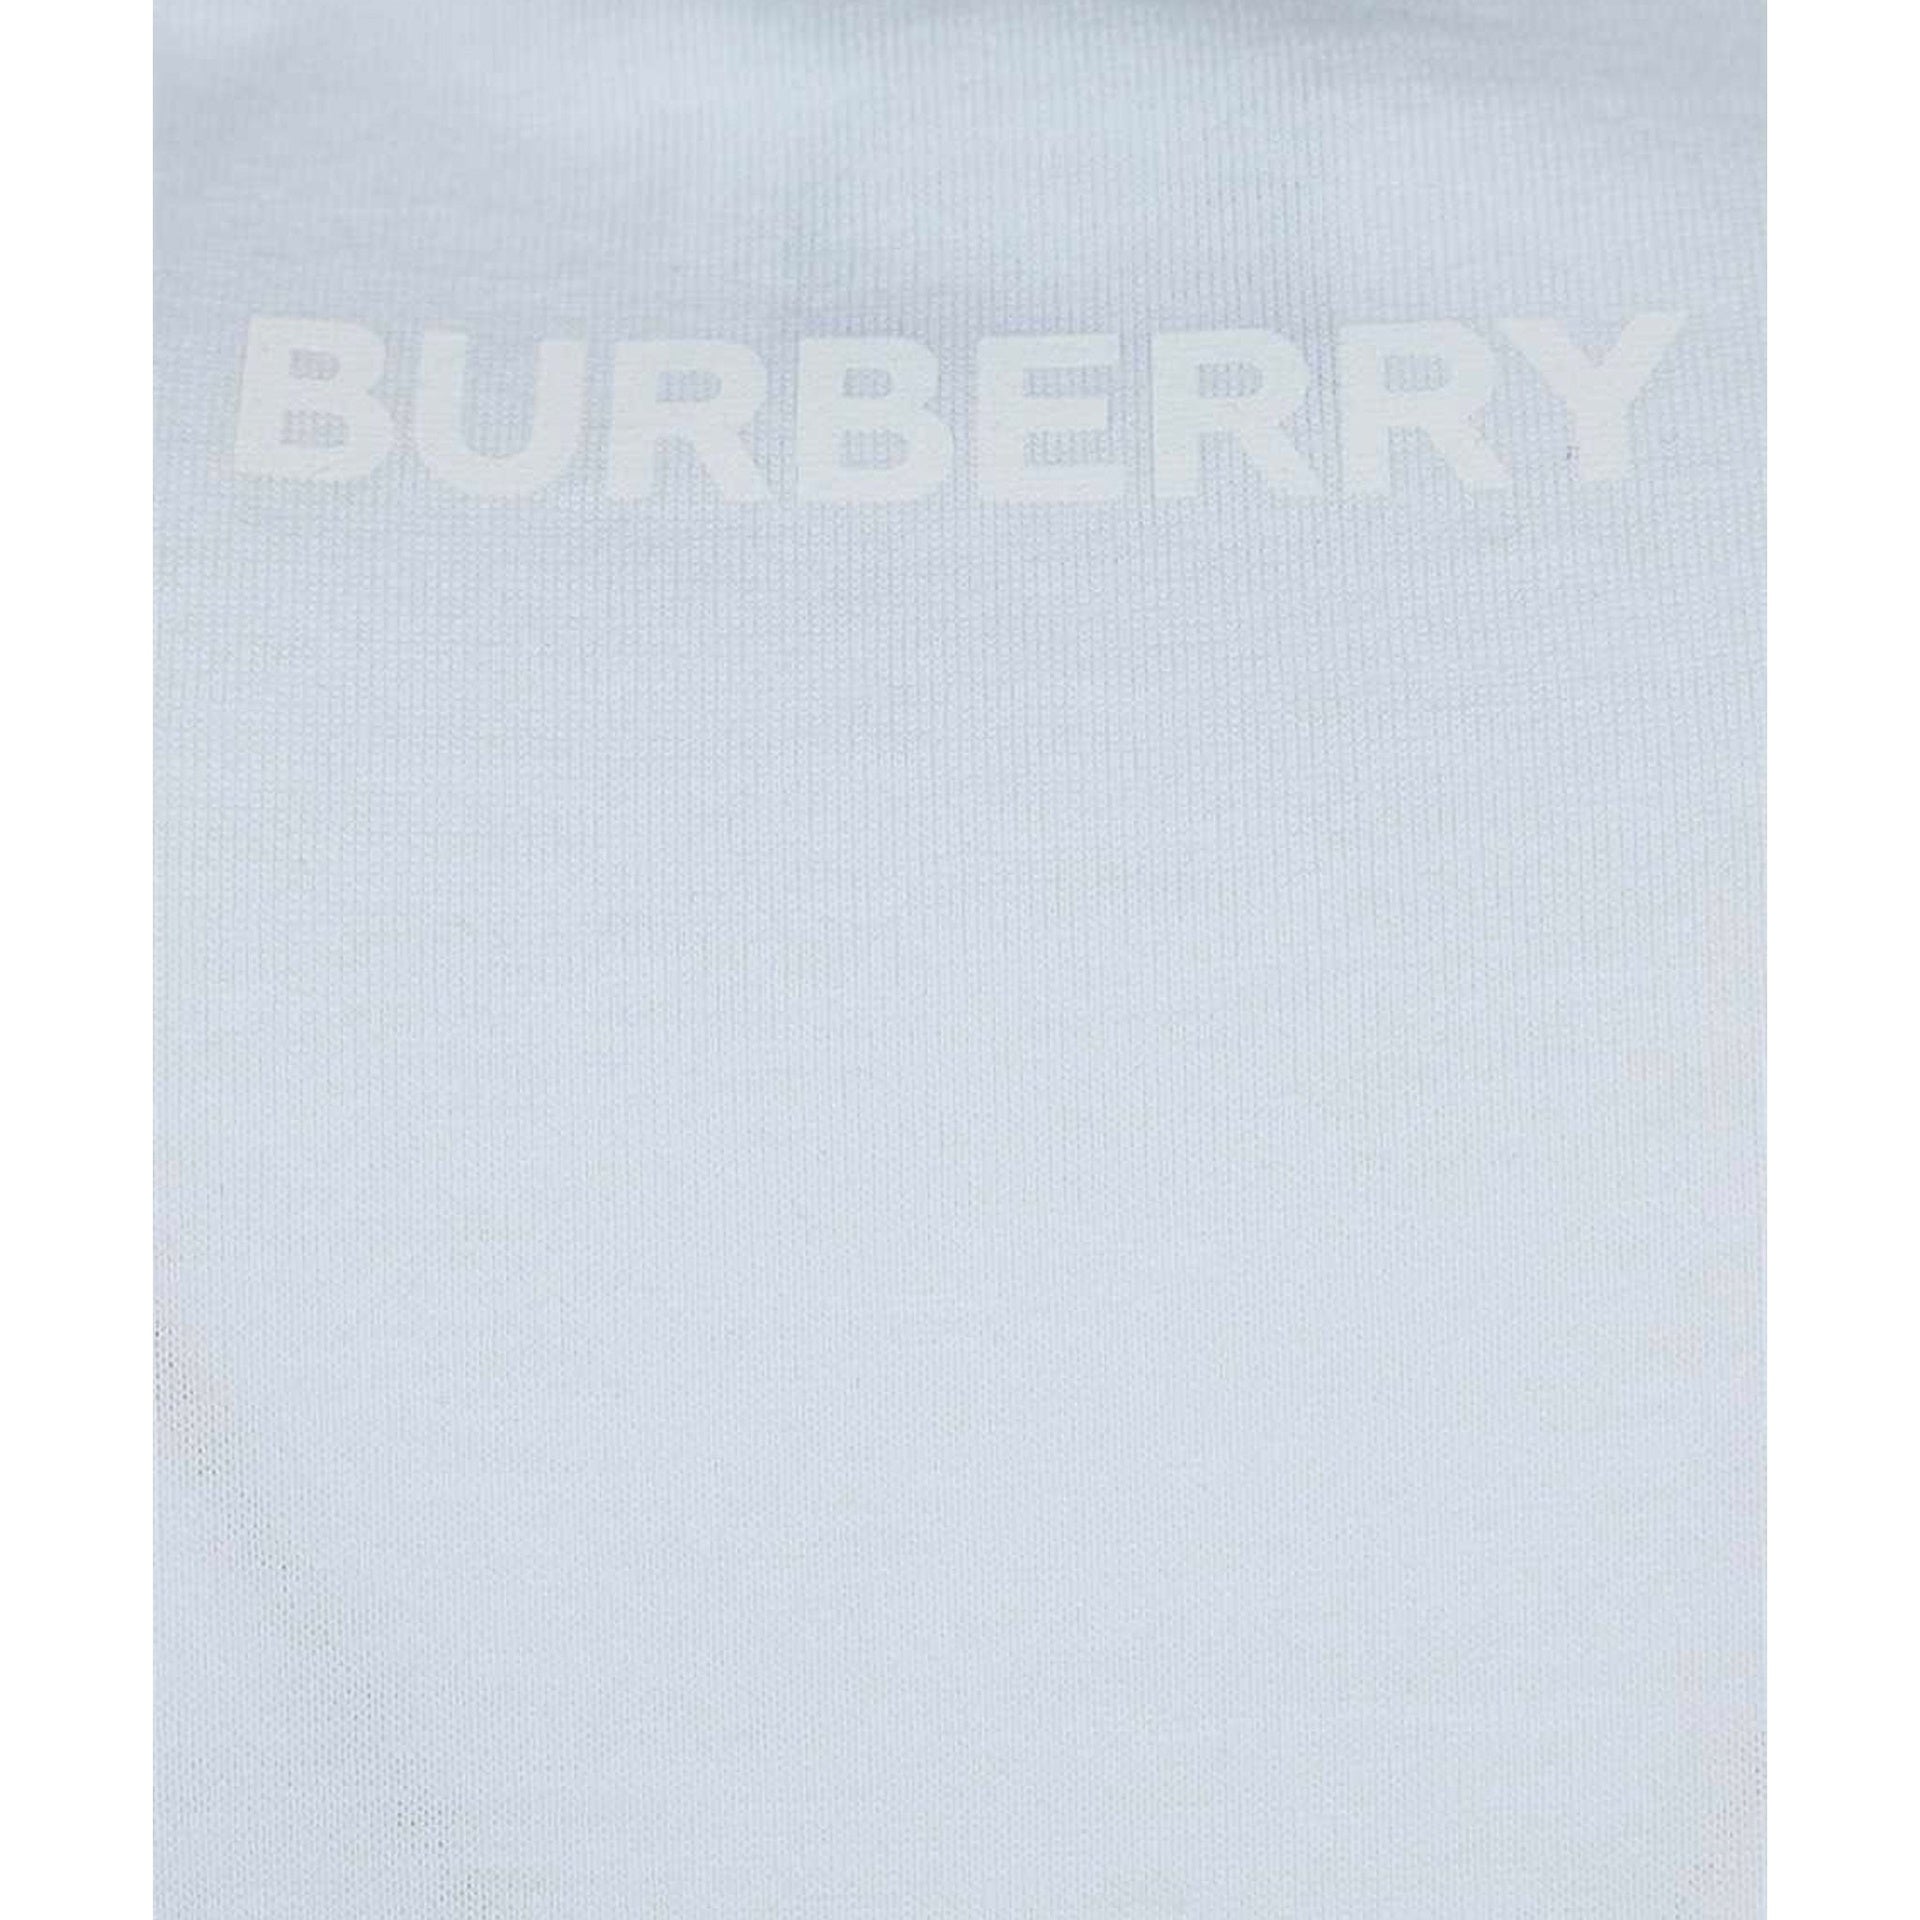 BURBERRY-OUTLET-SALE-Burberry-Cotton-Logo-T-Shirt-Shirts-ARCHIVE-COLLECTION-3.jpg